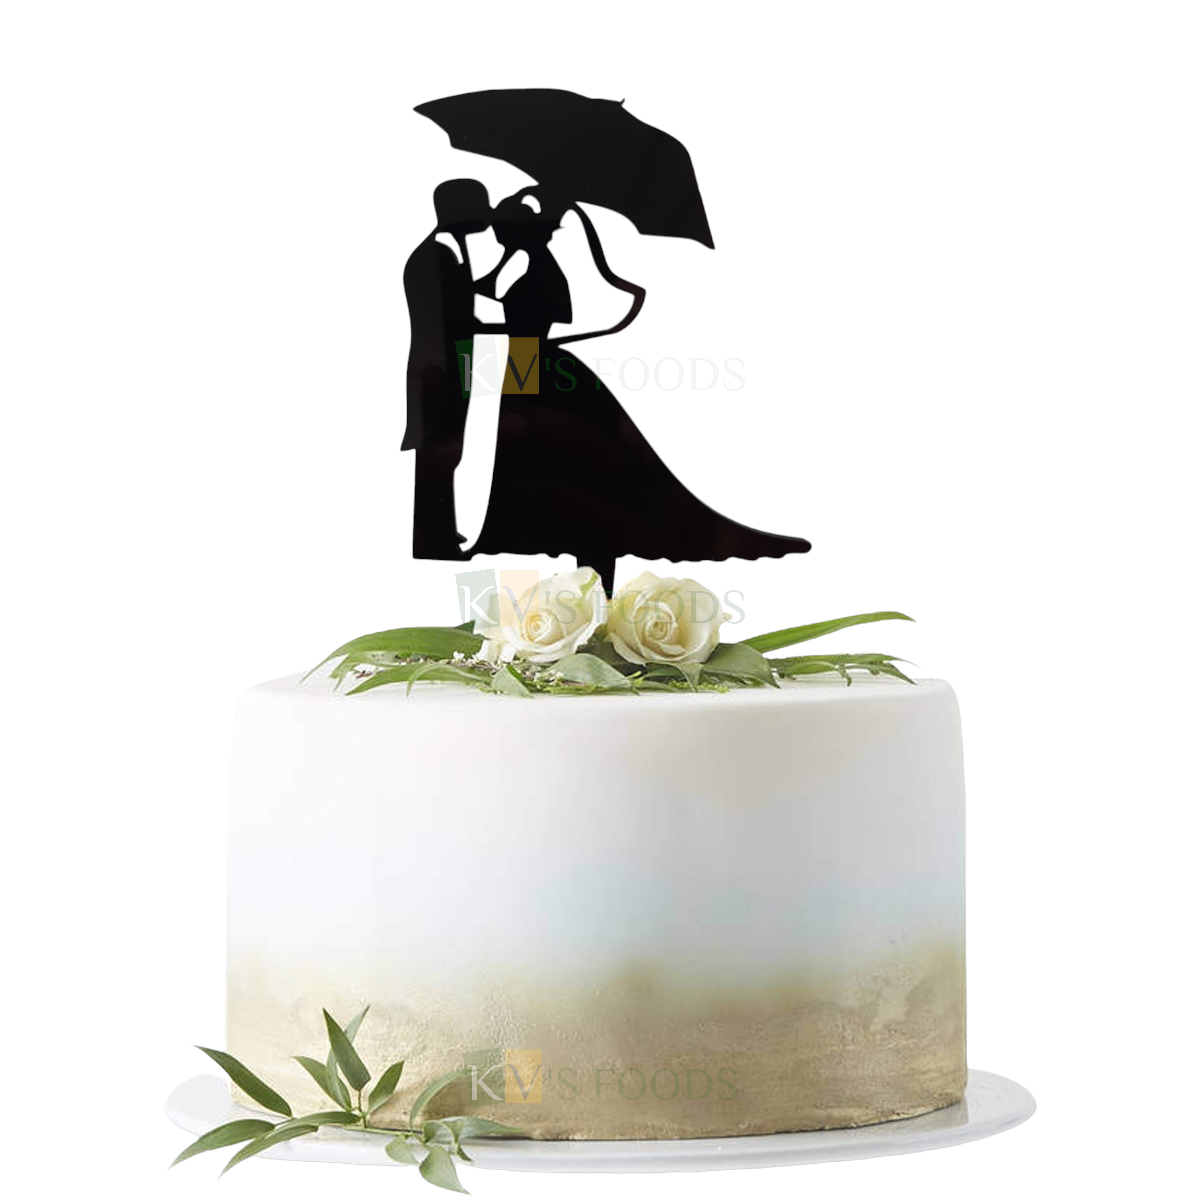 1PC Black Acrylic Dressed Up Standing Bride and Groom Kissing Under The Umbrella Cake Topper, Romantic Couples Engagement Cake Insert, Silhouette Cake Topper, Wedding Anniversary Cake Topper